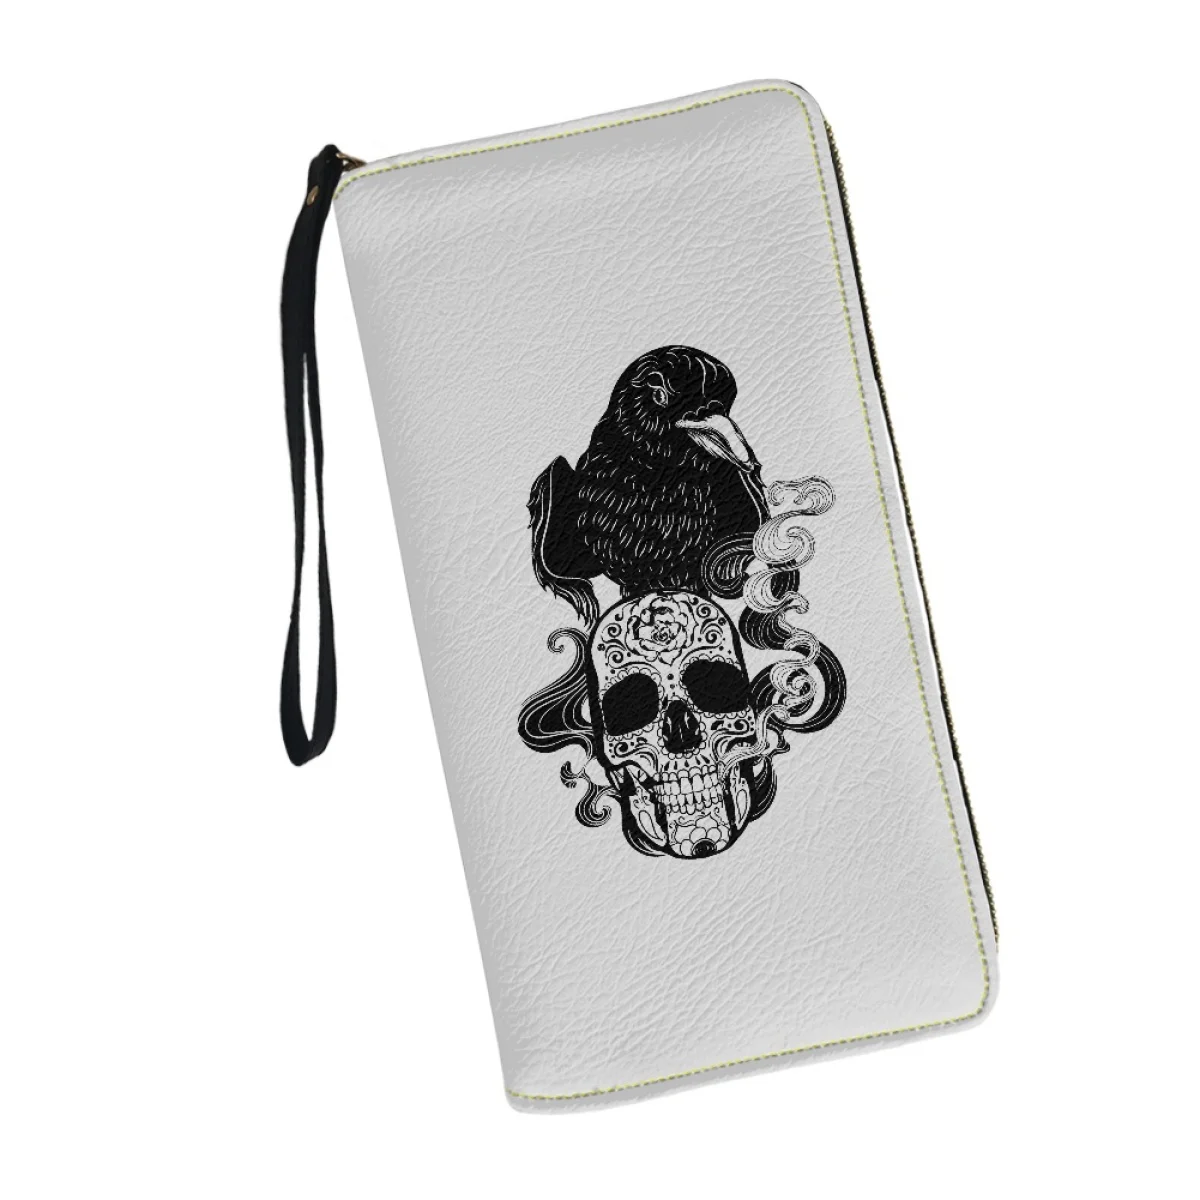 Woman Luxury Brand Wallet Pu Leather Skull And Crow Pattern Wallet Minimalist Wallets With Strap Carteras De Mujer